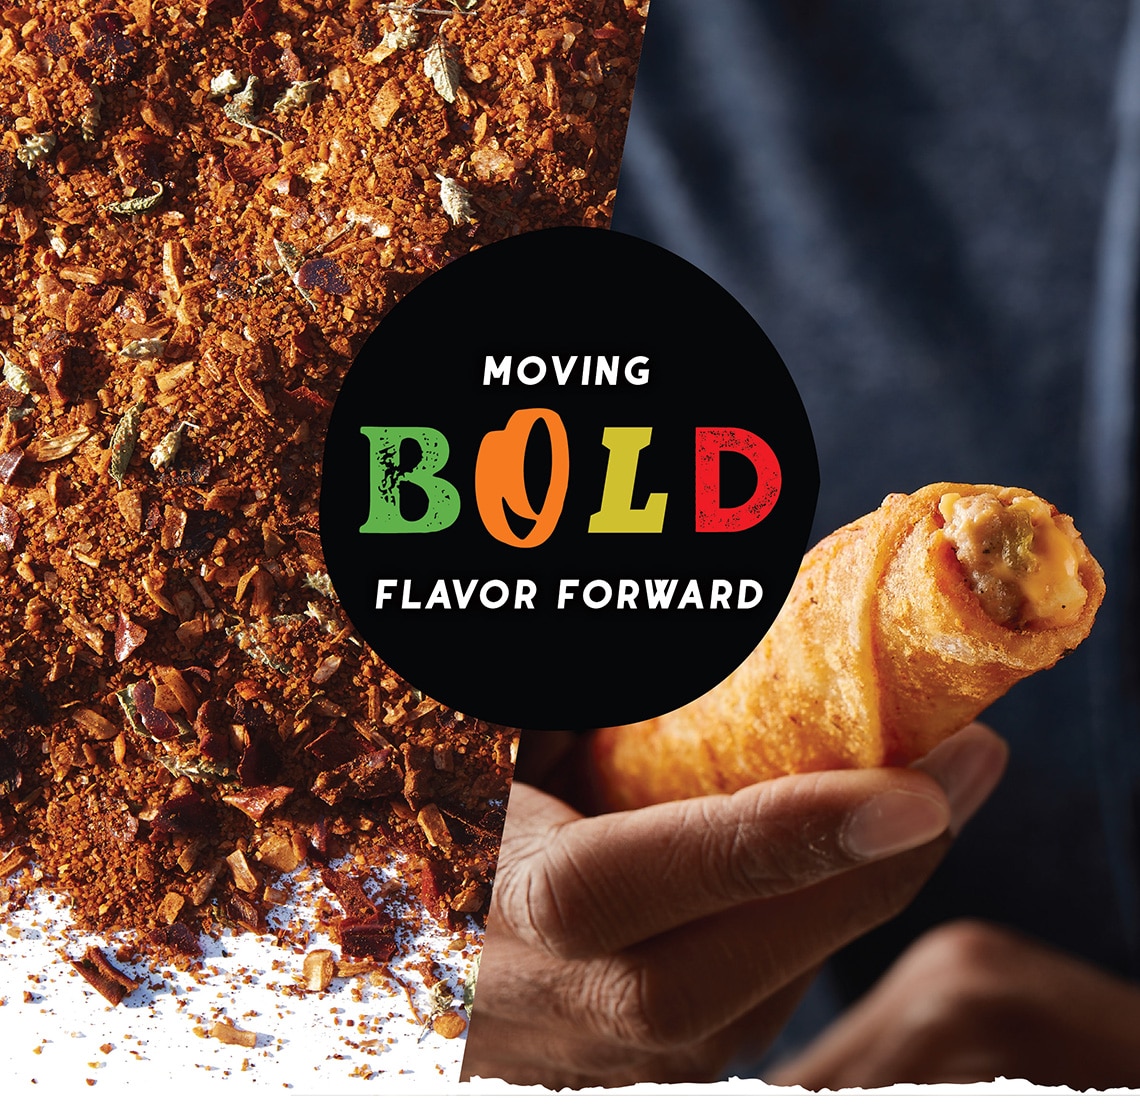 Moving BOLD flavor forward; Mexican-inspired. A pile of spices next to a hand holding a cheese and meat-stuffed Tornados taquito with the text